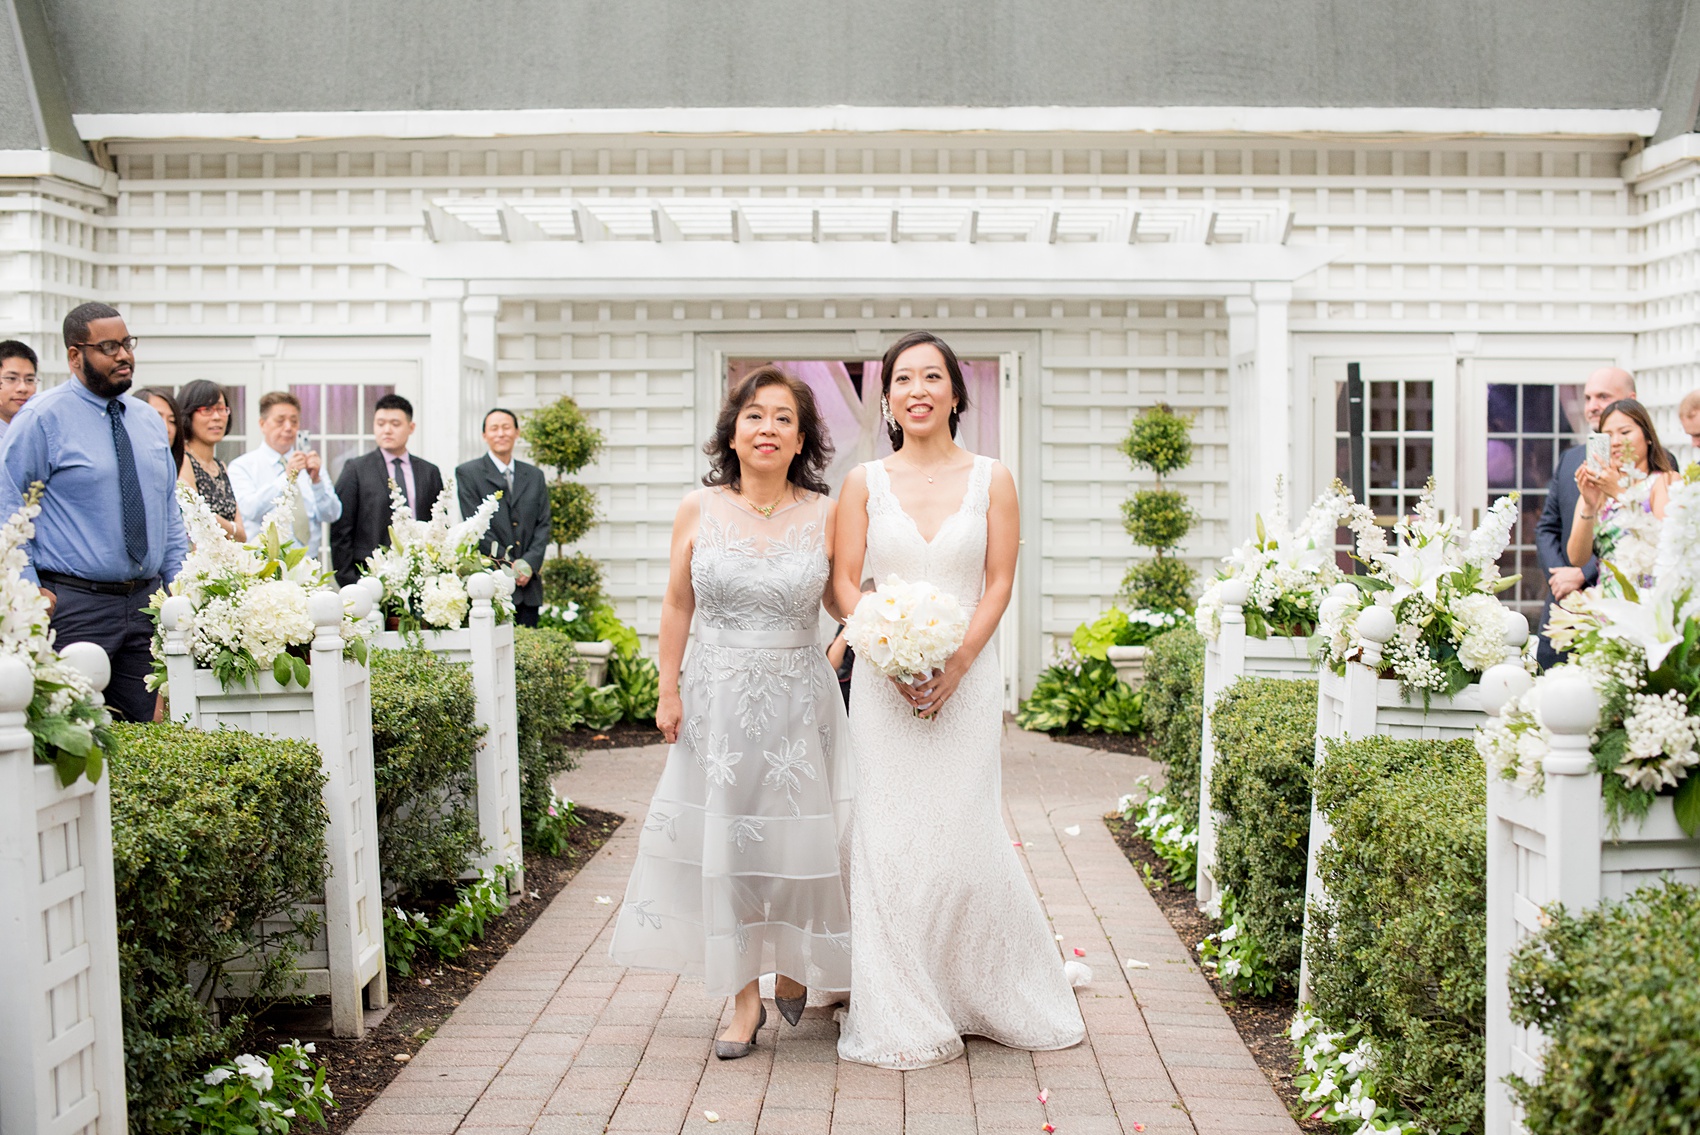 Mikkel Paige Photography pictures of a Westbury Manor wedding on Long Island. Photo of the bride and her mother walking down the aisle at their outdoor ceremony.